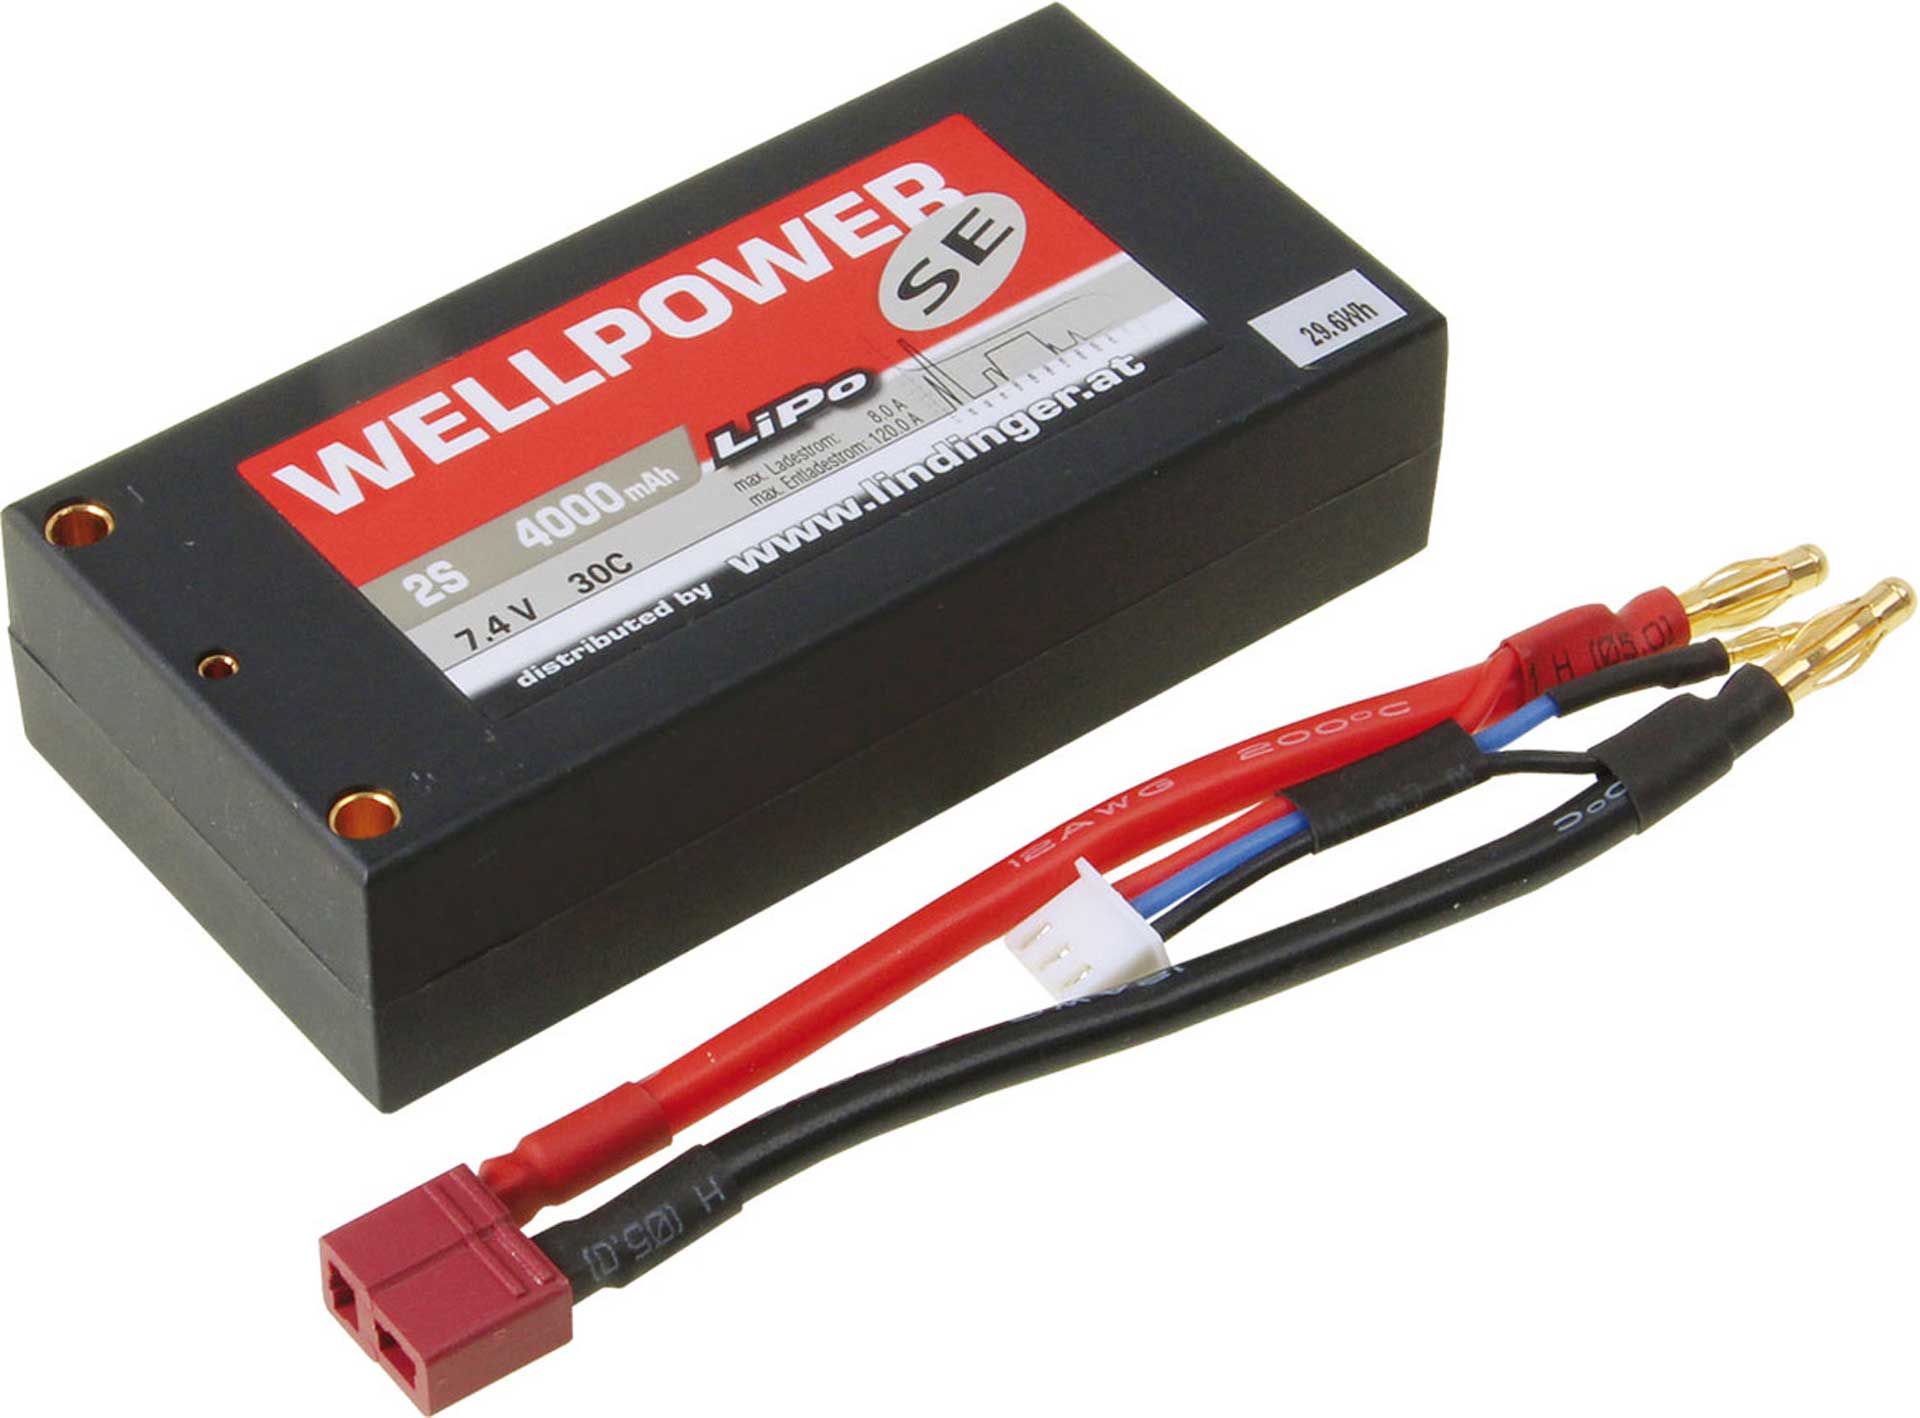 WELLPOWER LIPO BATTERY  PACK SE CAR 4000 MAH / 7,4 VOLT 2S 30C, HARD CASE WITH T-PLUG, 29,6WH